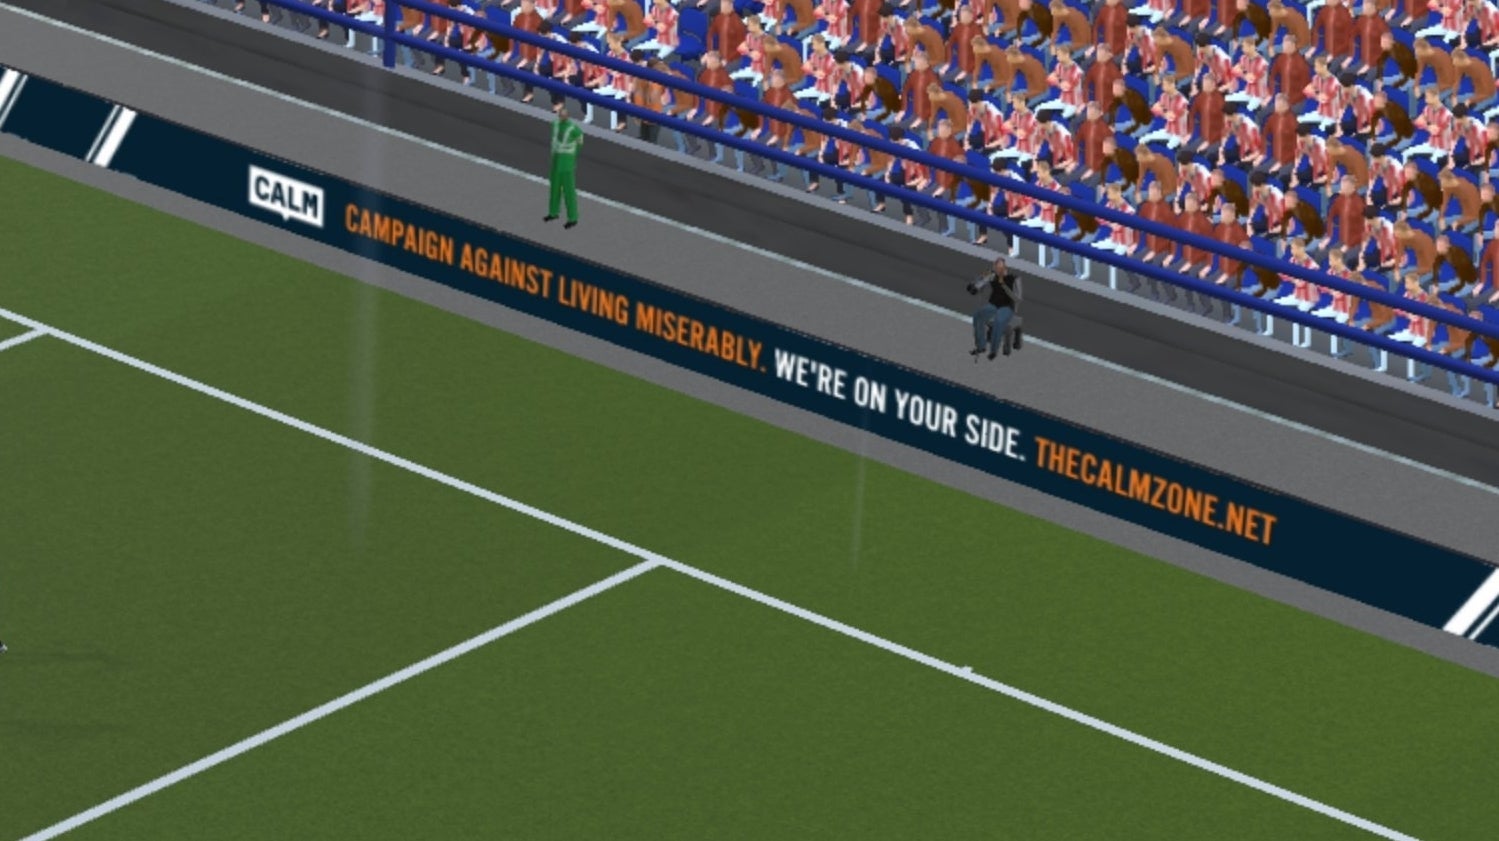 Image for Football Manager 2020 gives free in-game advertising space to mental health charity during lockdown